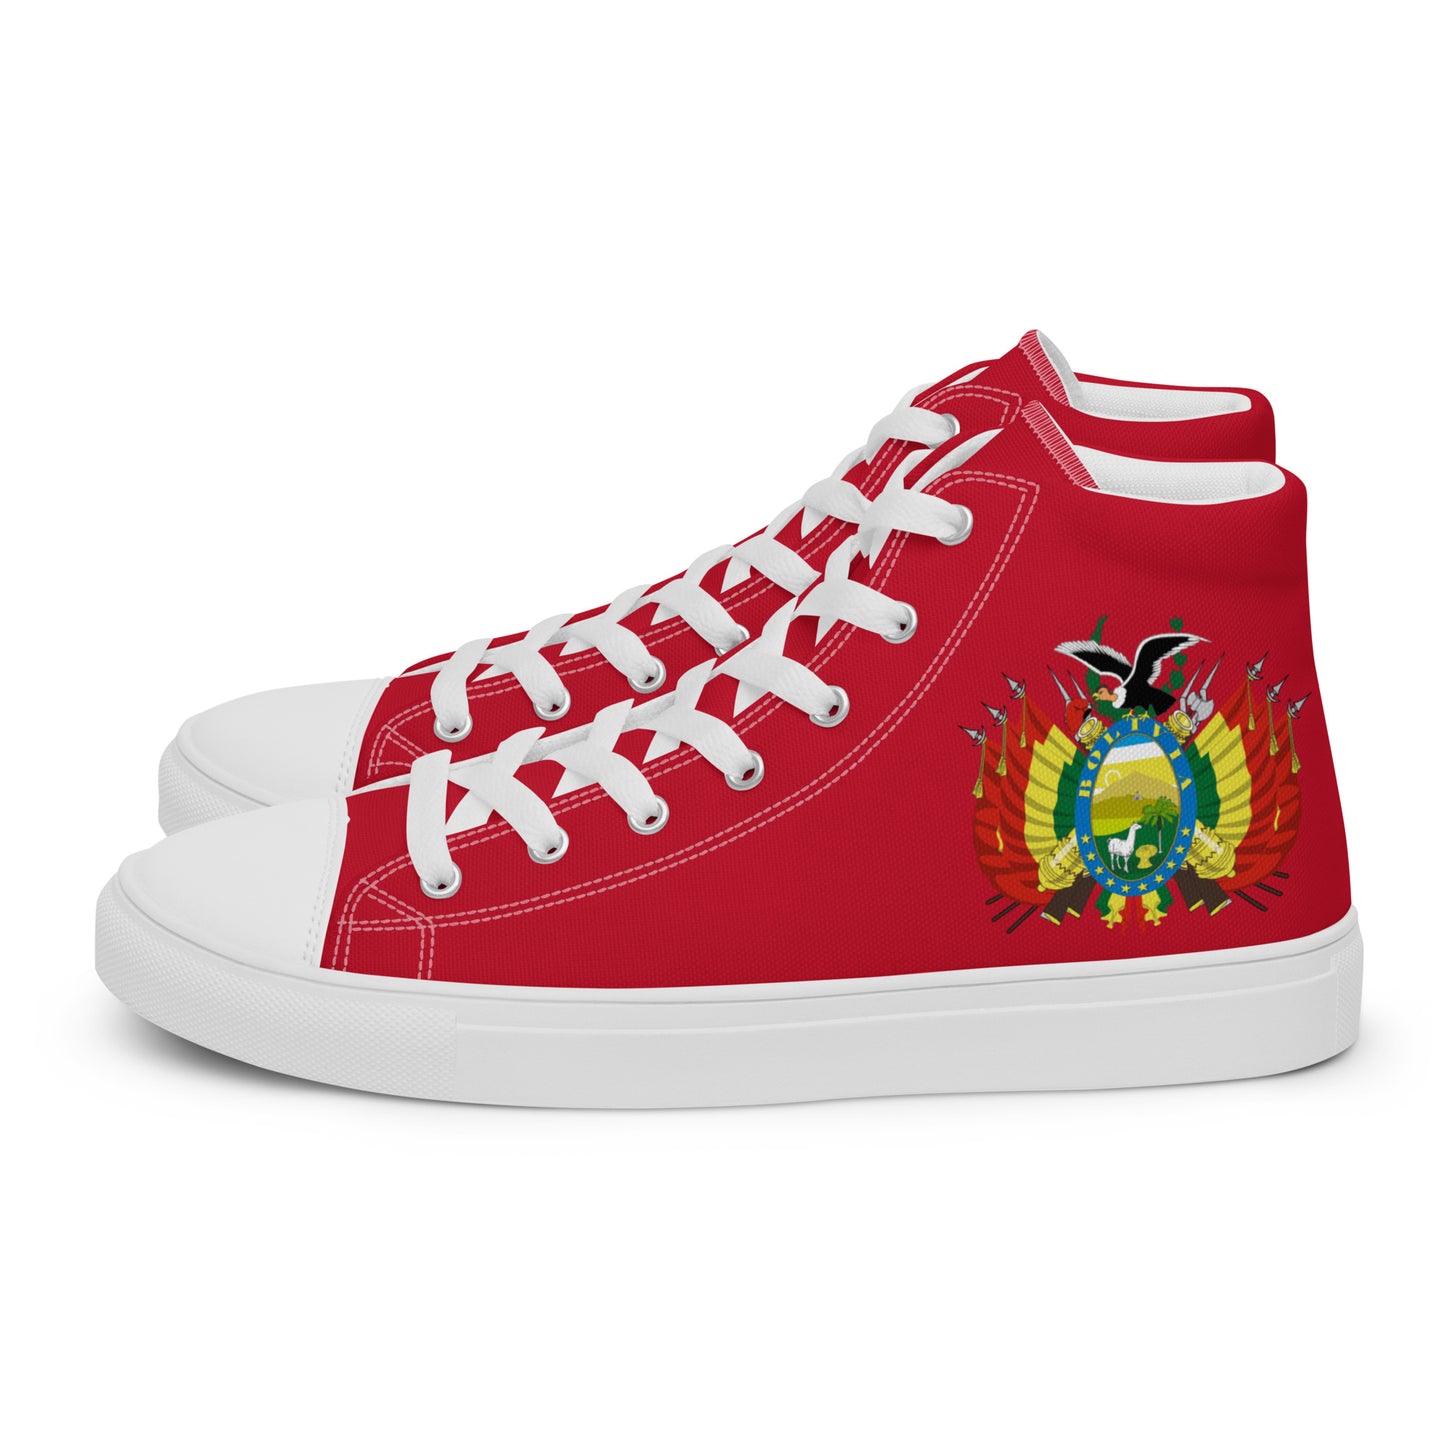 Bolivia - Men - Red - High top shoes